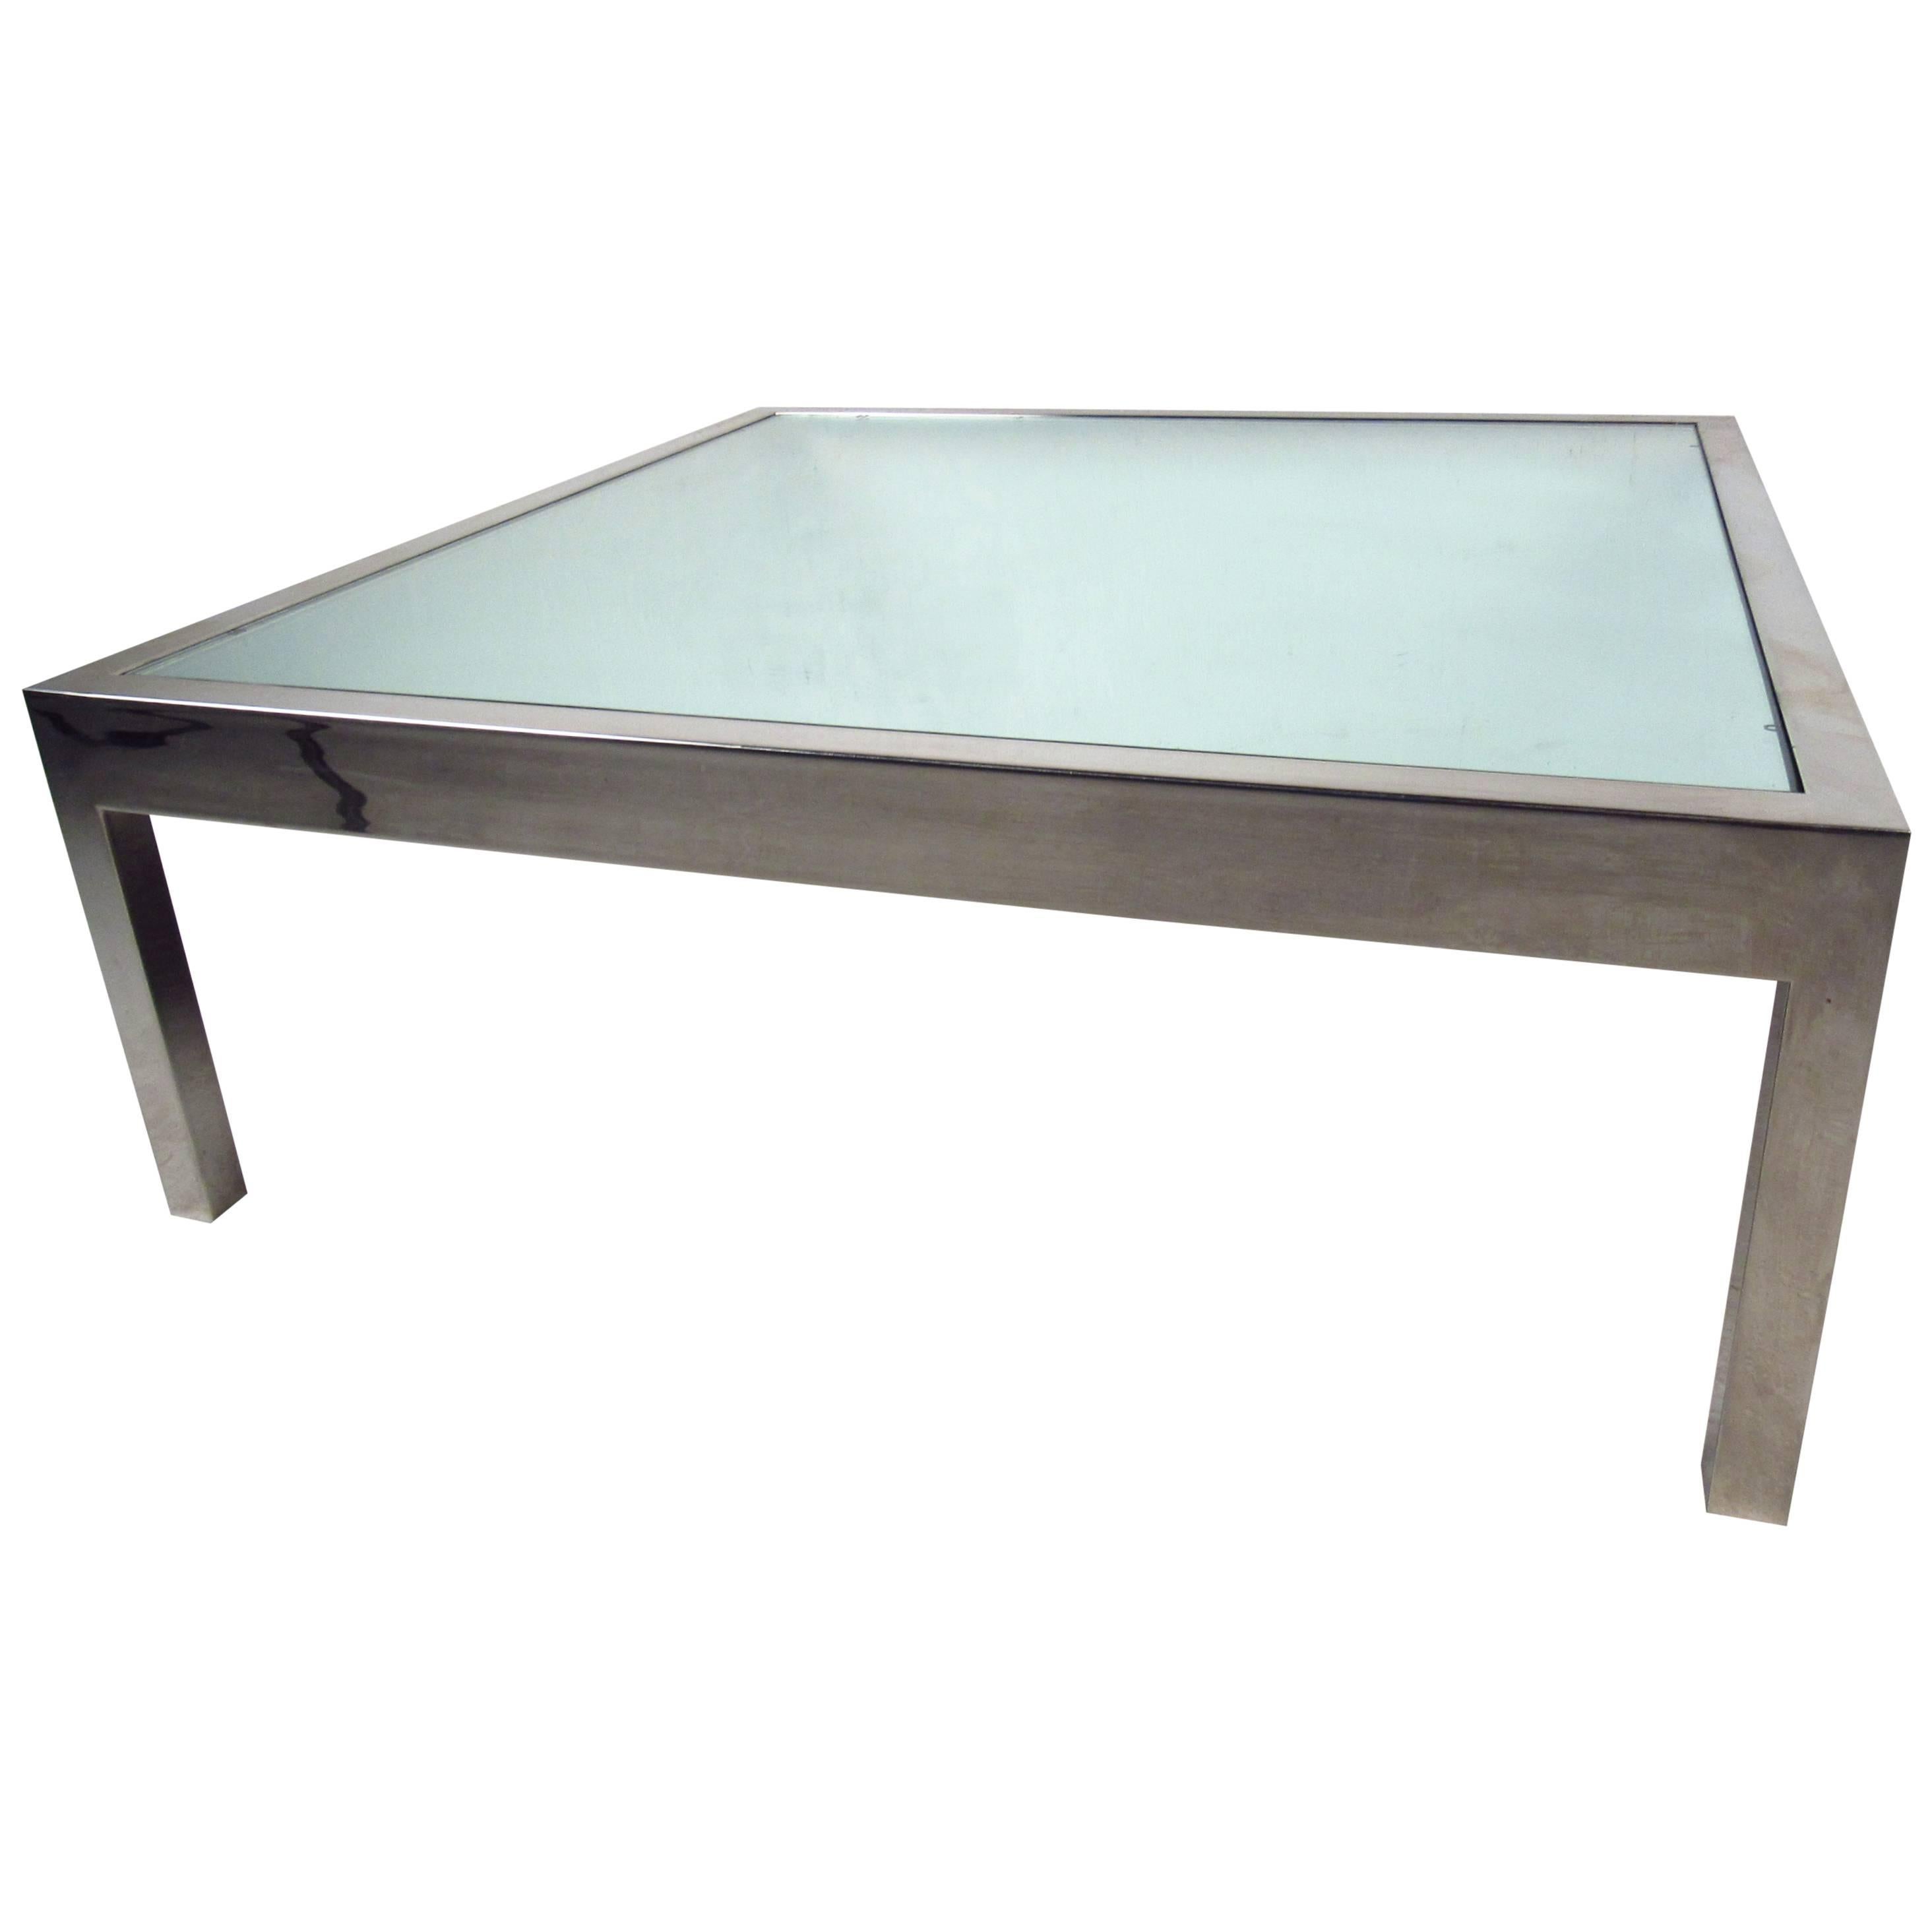 Unique Midcentury Mirrored Glass and Chrome Coffee Table For Sale